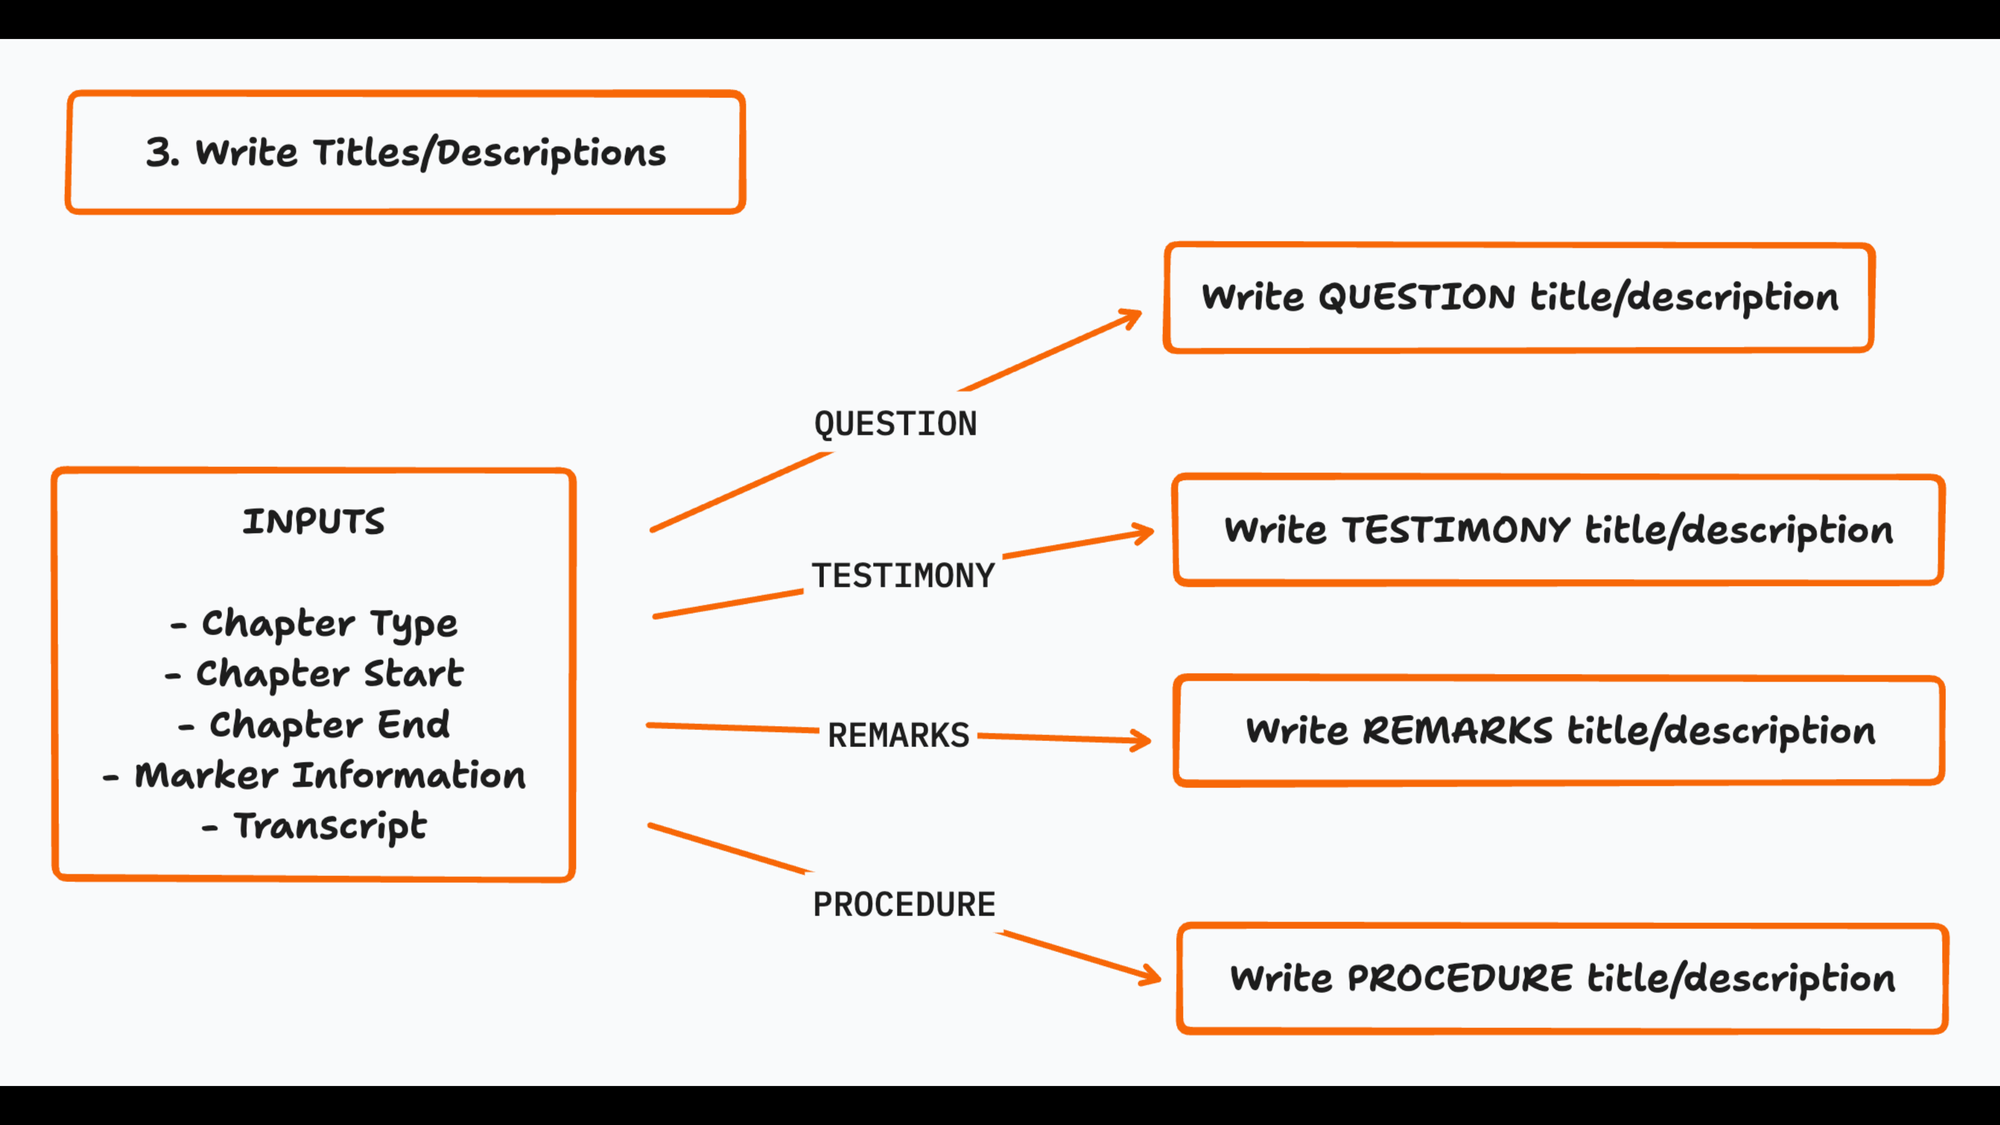 3. Write Titles/Descriptions. INPUTS: Chapter Type, Chapter Start, Chapter End, Marker Information, Transcript. Write QUESTION title/description. Write TESTIMONY title/description. Write REMARKS title/description. Write PROCEDURE title/description.